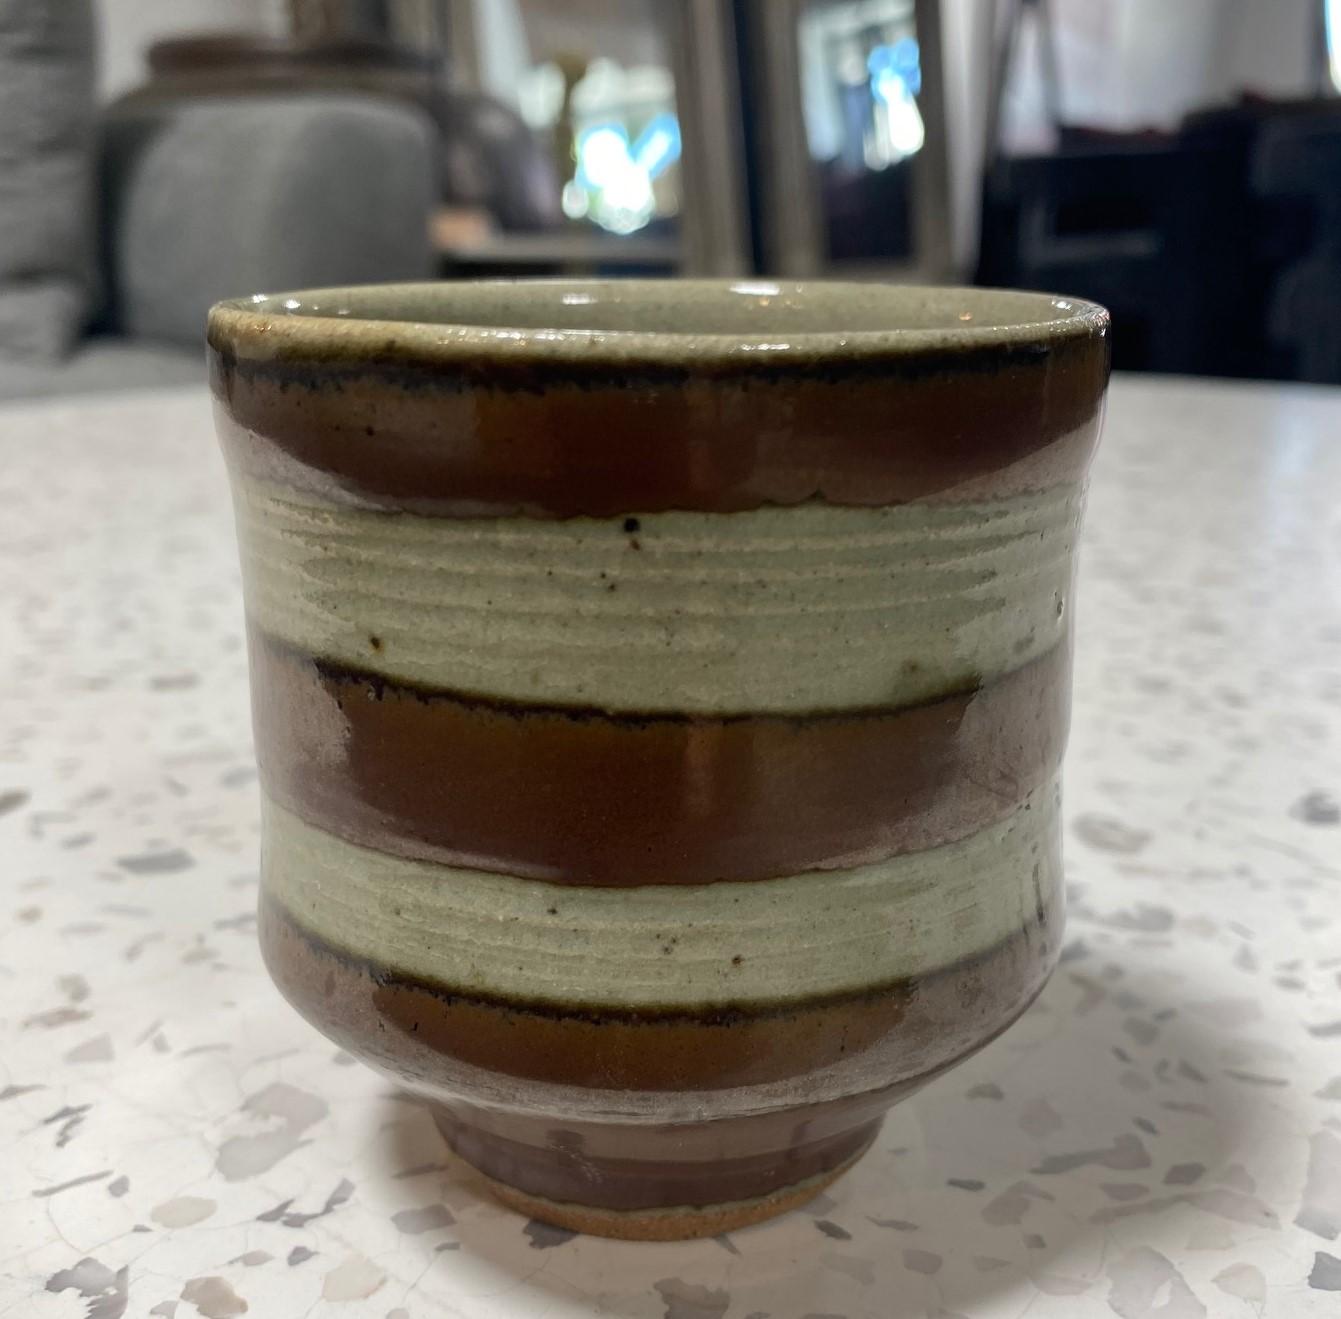 An exquisite, beautifully crafted, and wonderfully designed Yunomi teacup by master Japanese potter Shoji Hamada featuring his wax-resistant technique and highly coveted thick rich Kaki glaze over Mashiko stoneware pottery in a circular striped